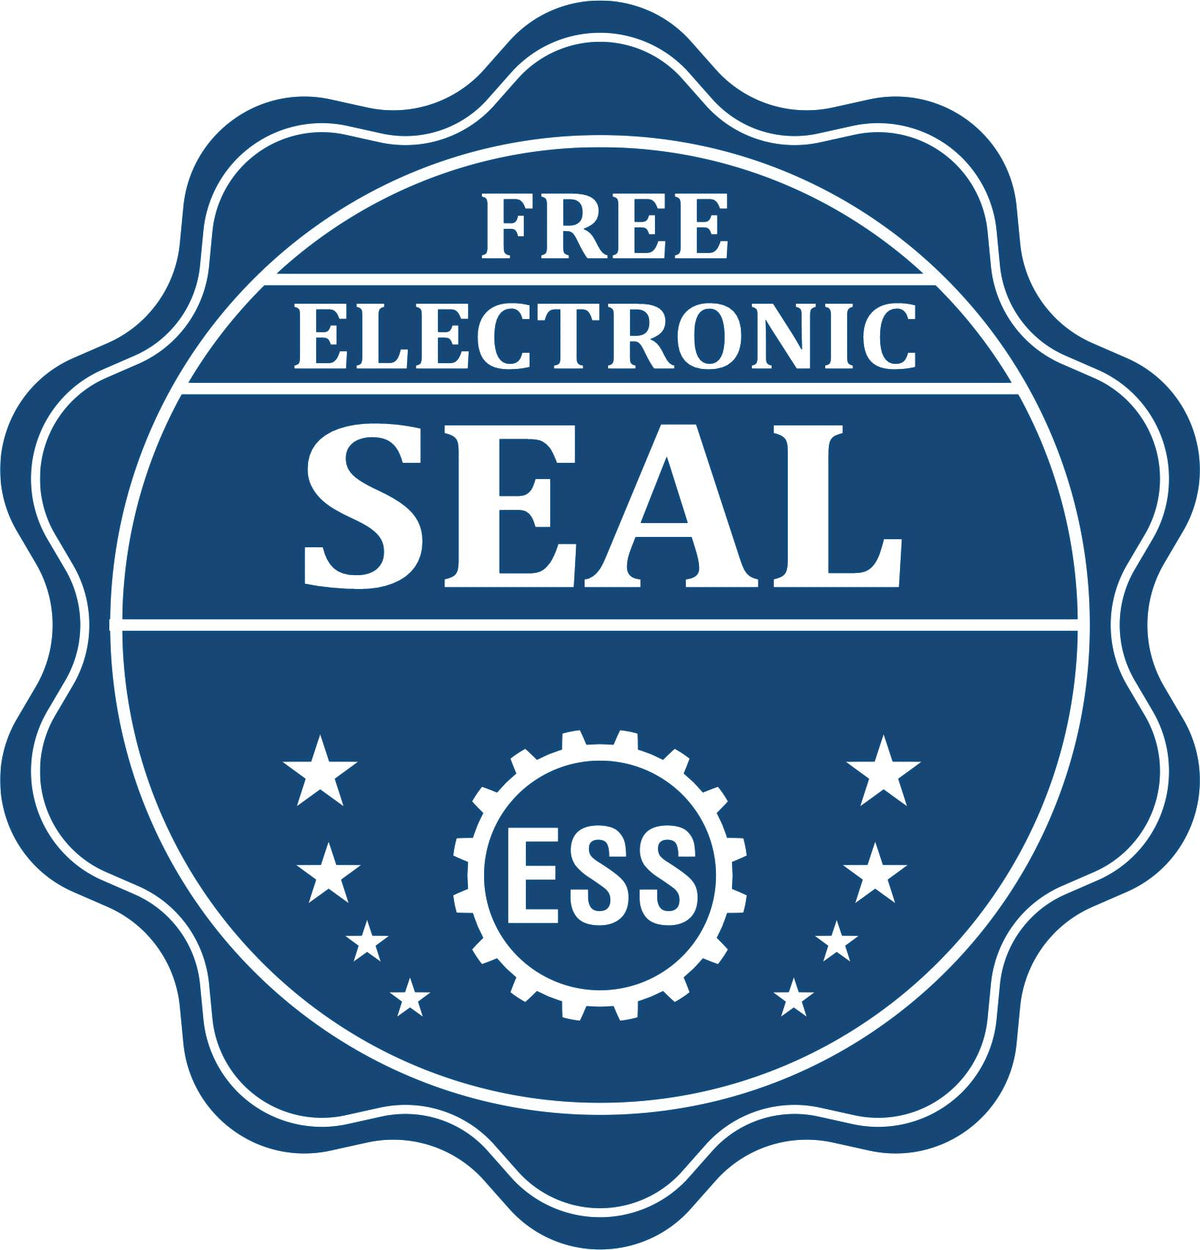 A badge showing a free electronic seal for the Slim Pre-Inked Nebraska Professional Geologist Seal Stamp with stars and the ESS gear on the emblem.